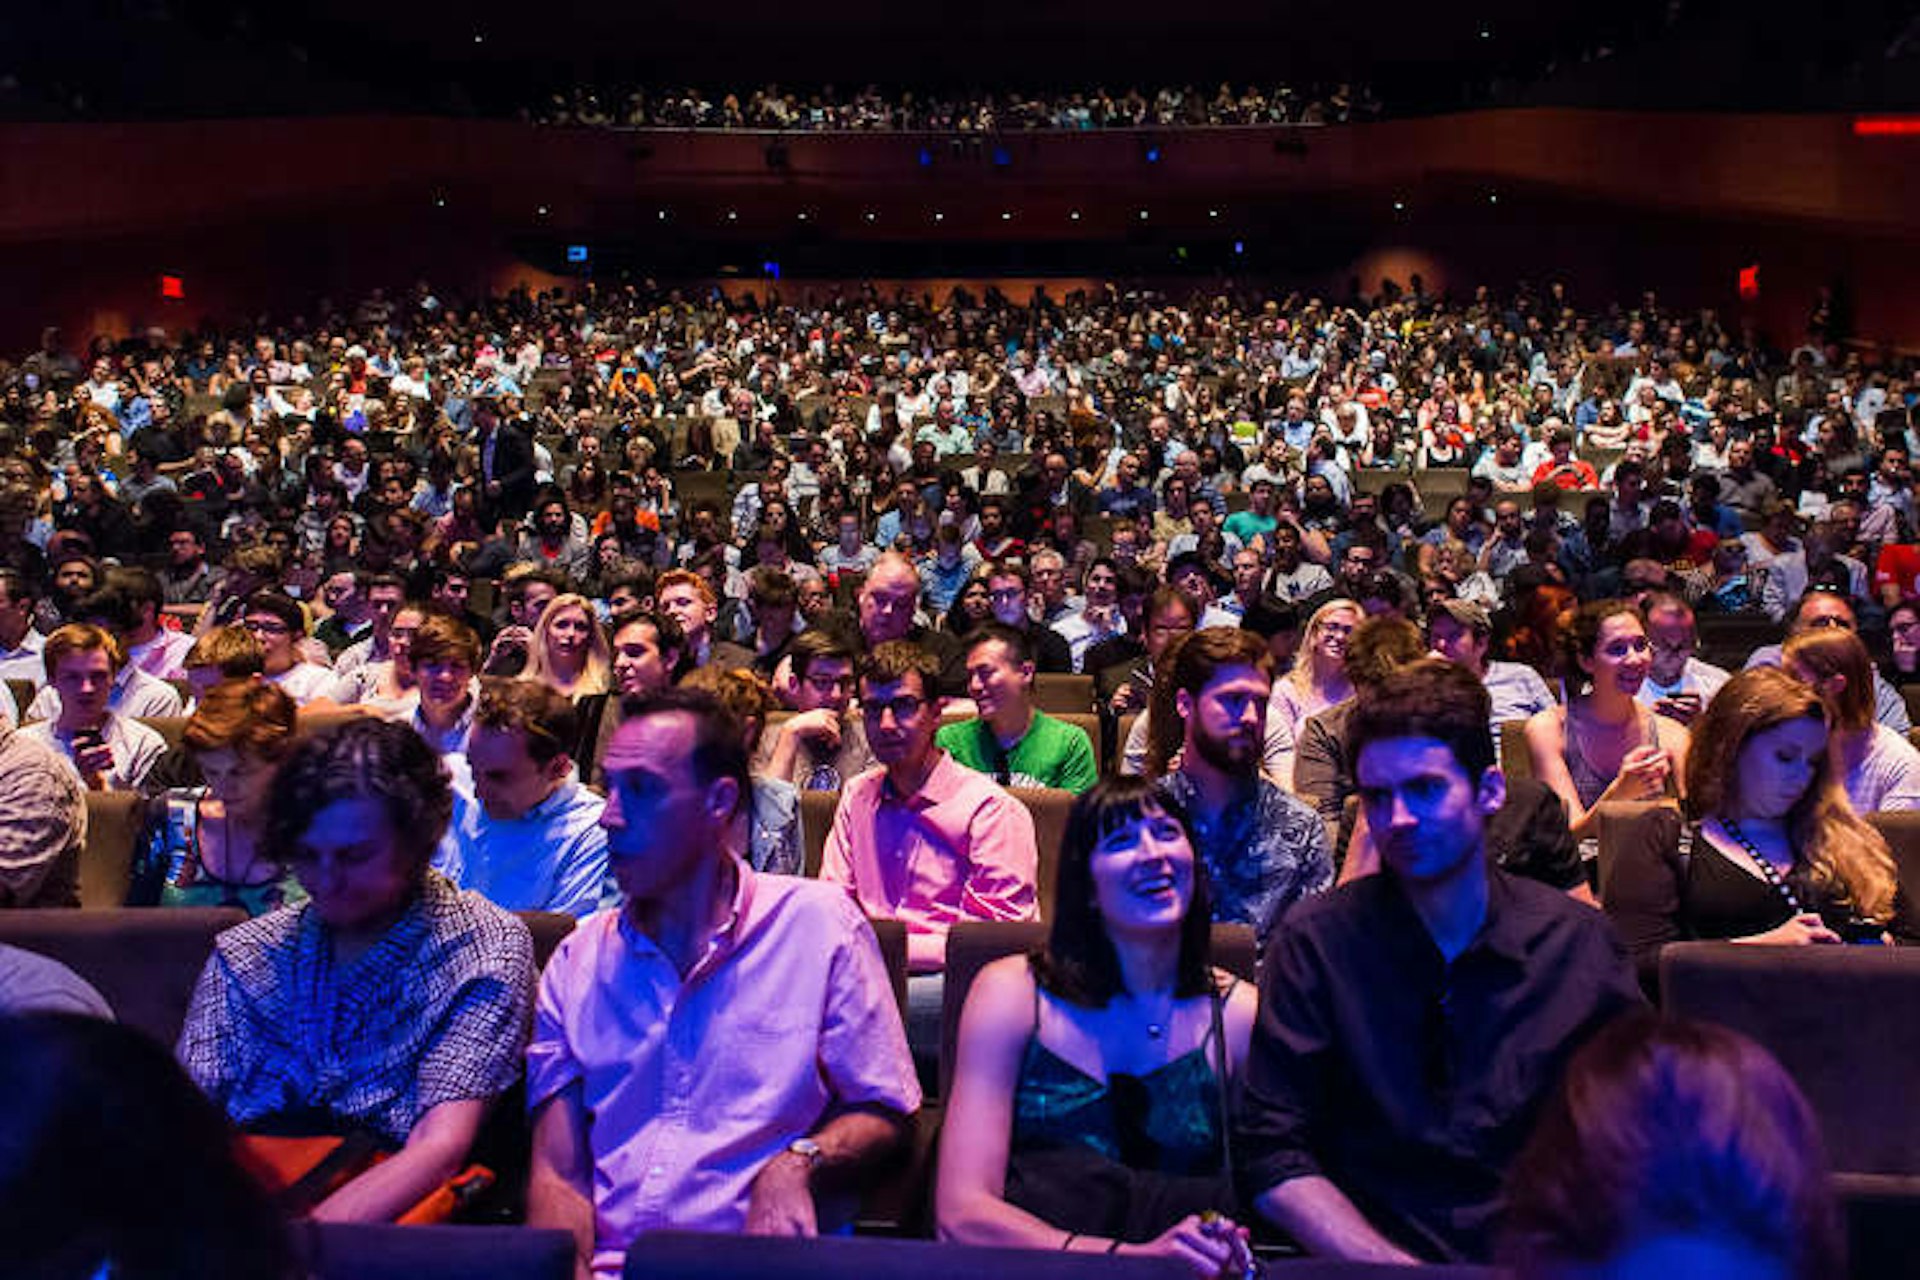 Eager audience at the New York Film Festival. Image by Sachyn Mital / courtesy of New York Film Festival